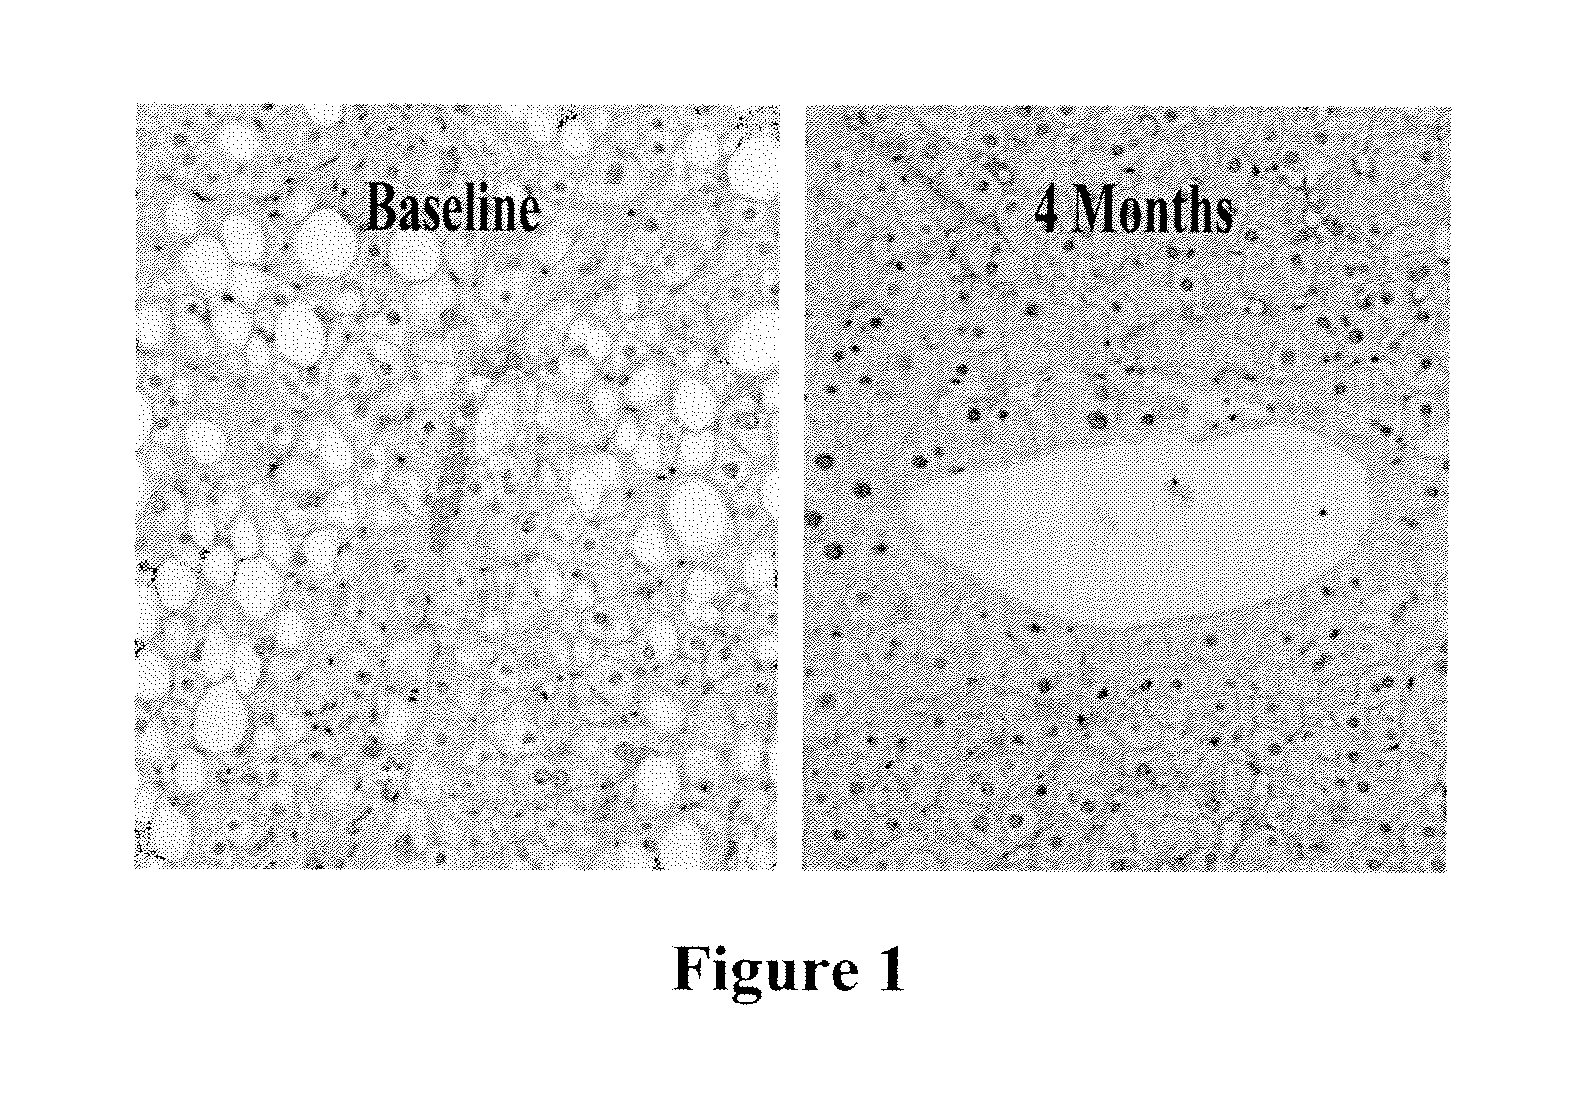 Method of treating fatty liver diseases and conditions in non-lipodystrophic subjects